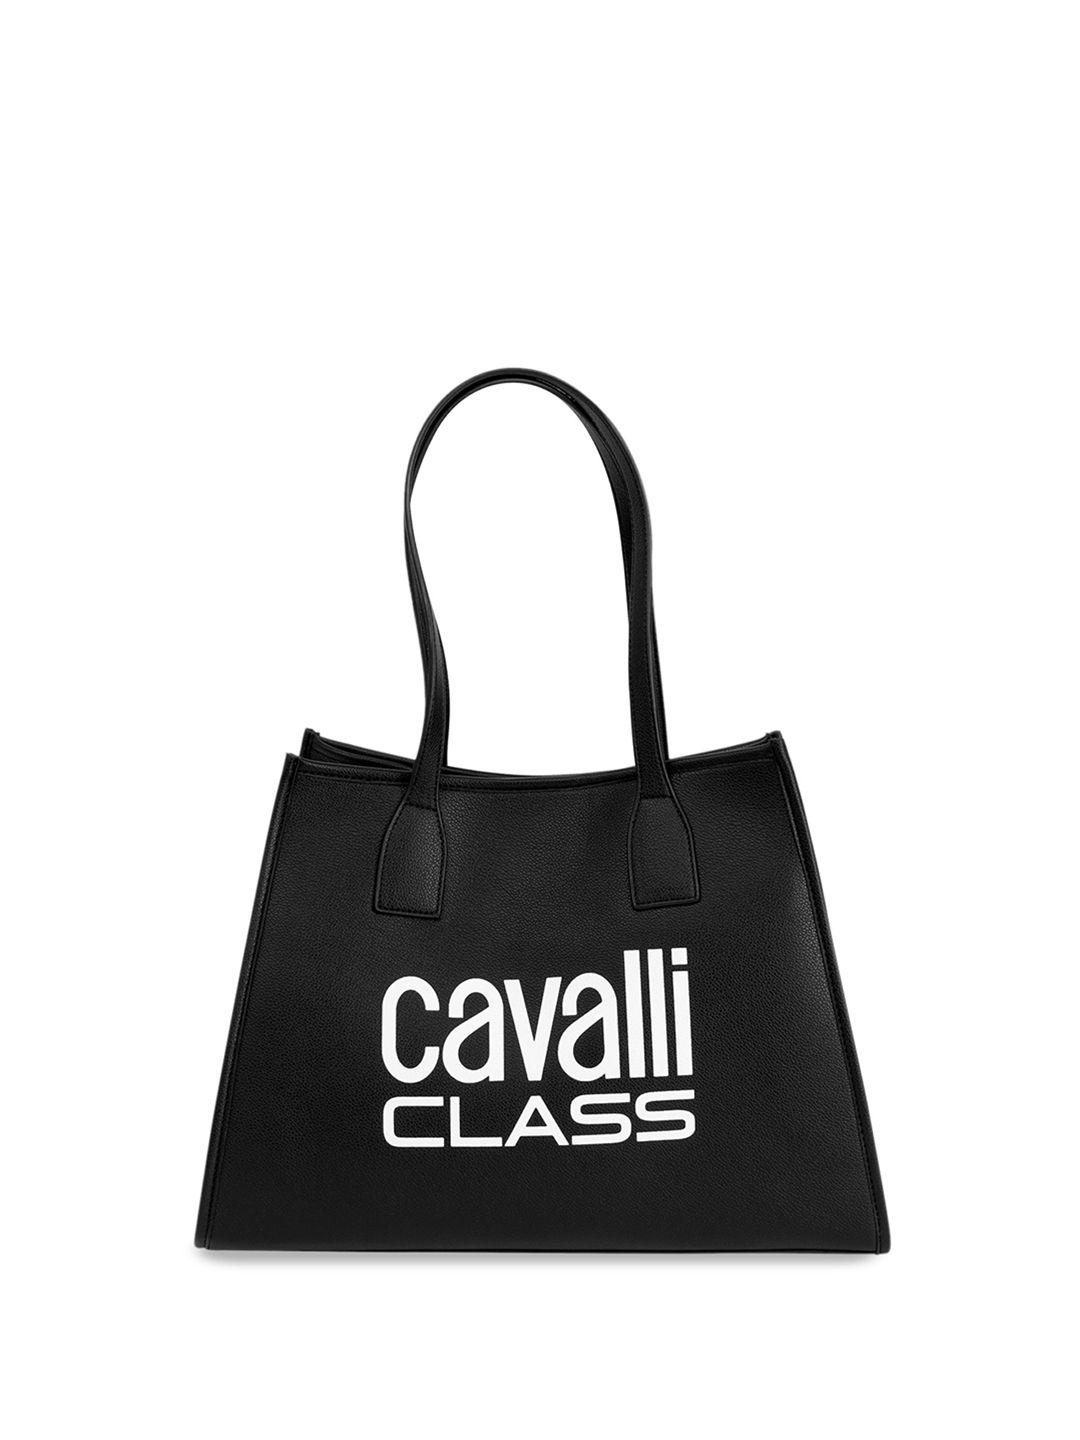 Cavalli Class Printed Structured Tote Bag with Applique